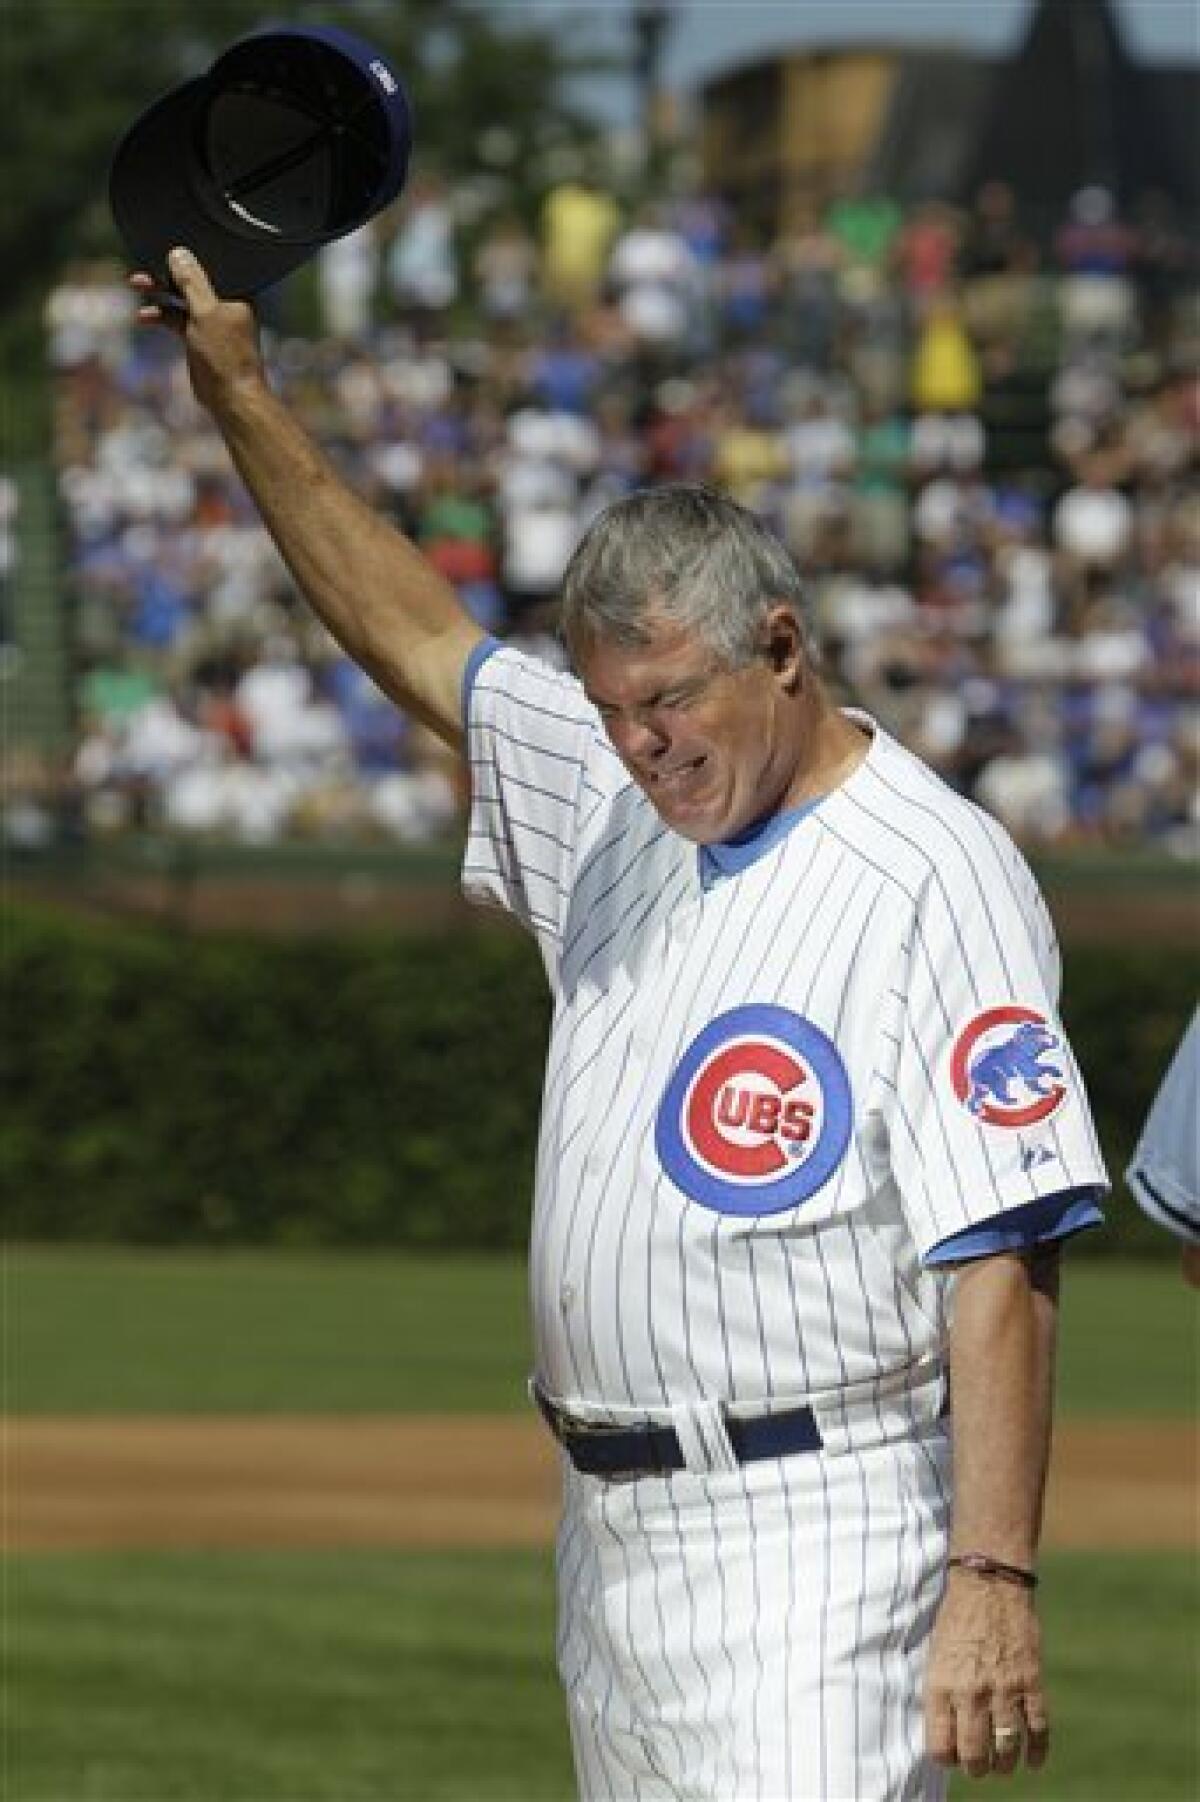 Chicago Cubs manager Lou Piniella reacts after umpire's call on a